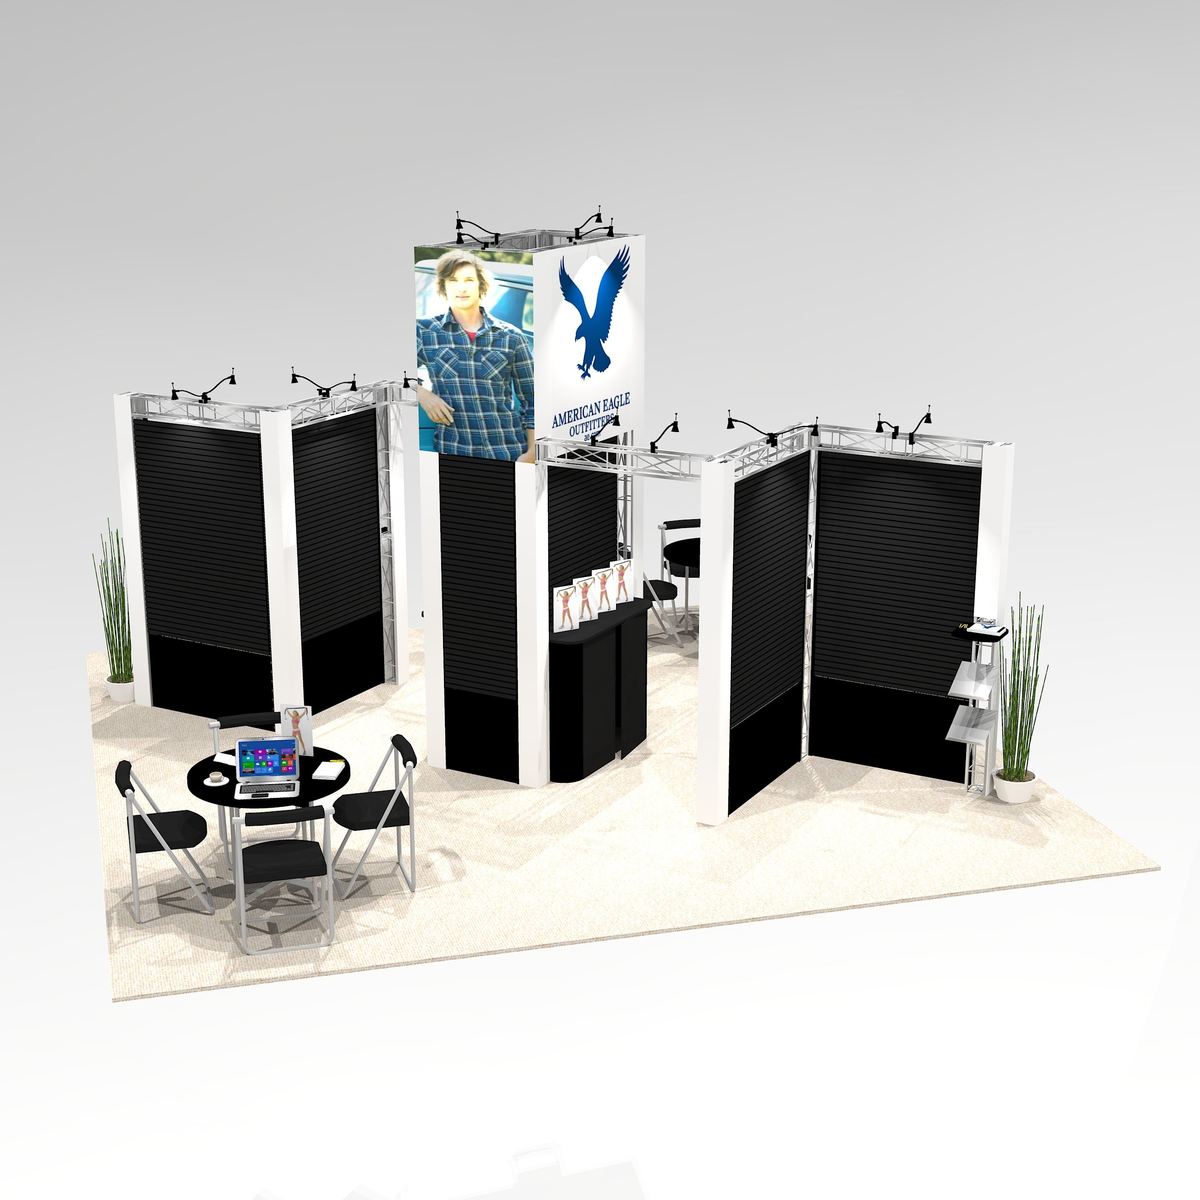 Slat wall Island trade show exhibit design ALA2020 Graphic Package A